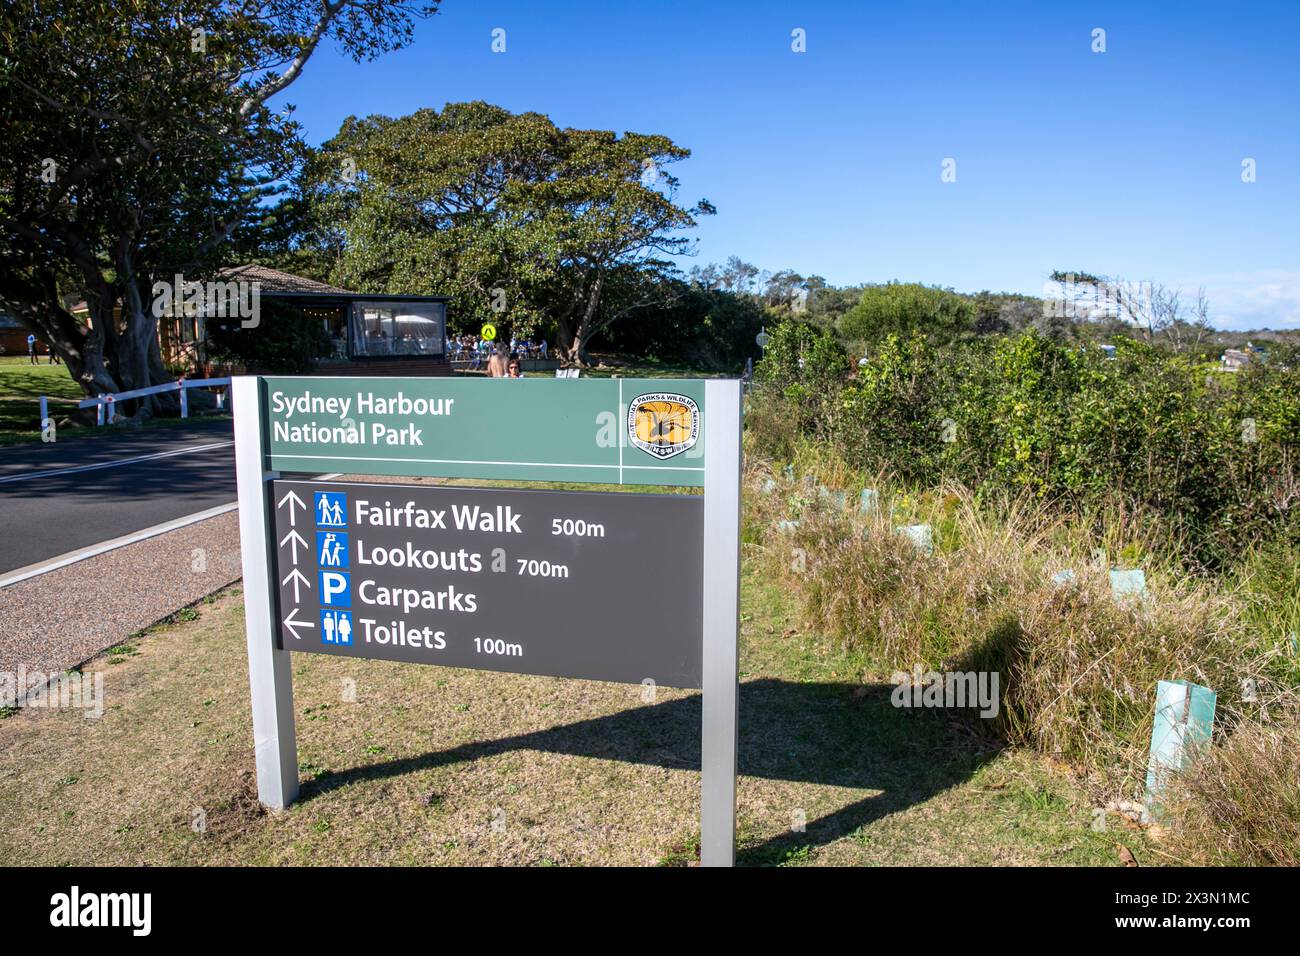 Sydney Harbour national park sign on North Head Manly with directions to Fairfax track walk and lookouts,Sydney,NSW,Australia Stock Photo